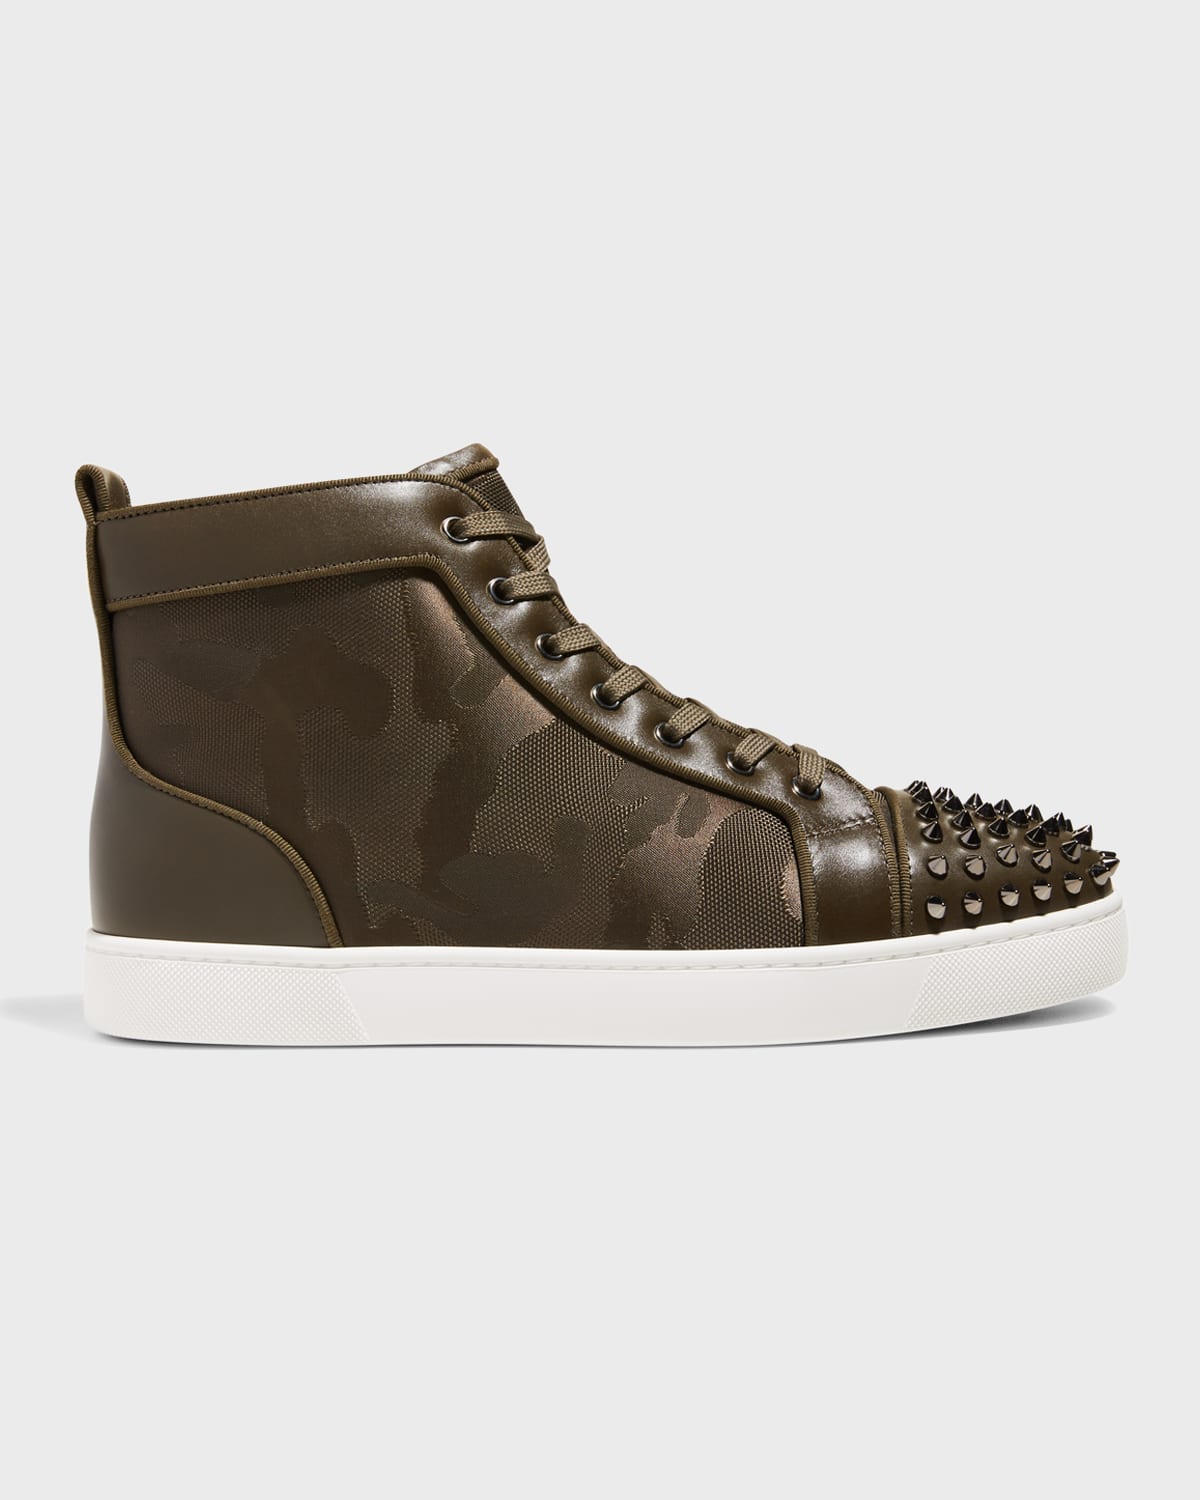 Christian Louboutin Men's Lou Spikes Camouflage Nylon High-Top Sneakers